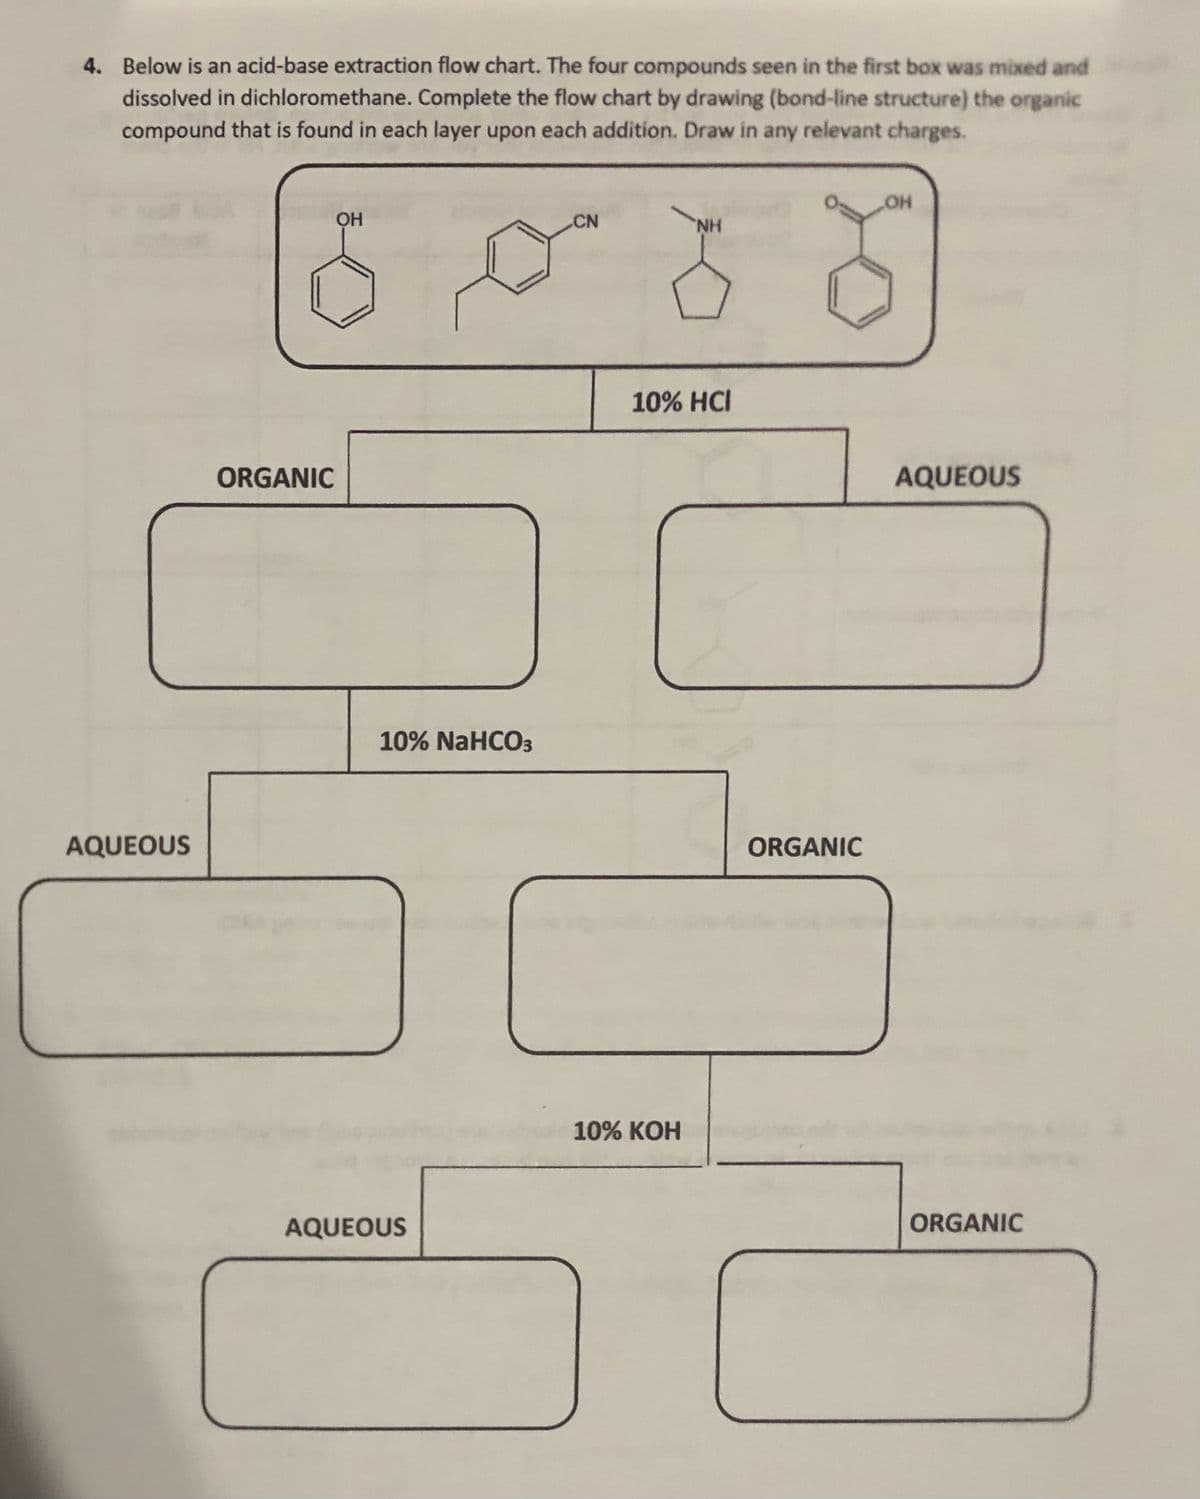 4. Below is an acid-base extraction flow chart. The four compounds seen in the first box was mixed and
dissolved in dichloromethane. Complete the flow chart by drawing (bond-line structure) the organic
compound that is found in each layer upon each addition. Draw in any relevant charges.
OH
CN
10% HCI
ORGANIC
AQUEOUS
10% NaHCO3
AQUEOUS
ORGANIC
10% КОН
AQUEOUS
ORGANIC
